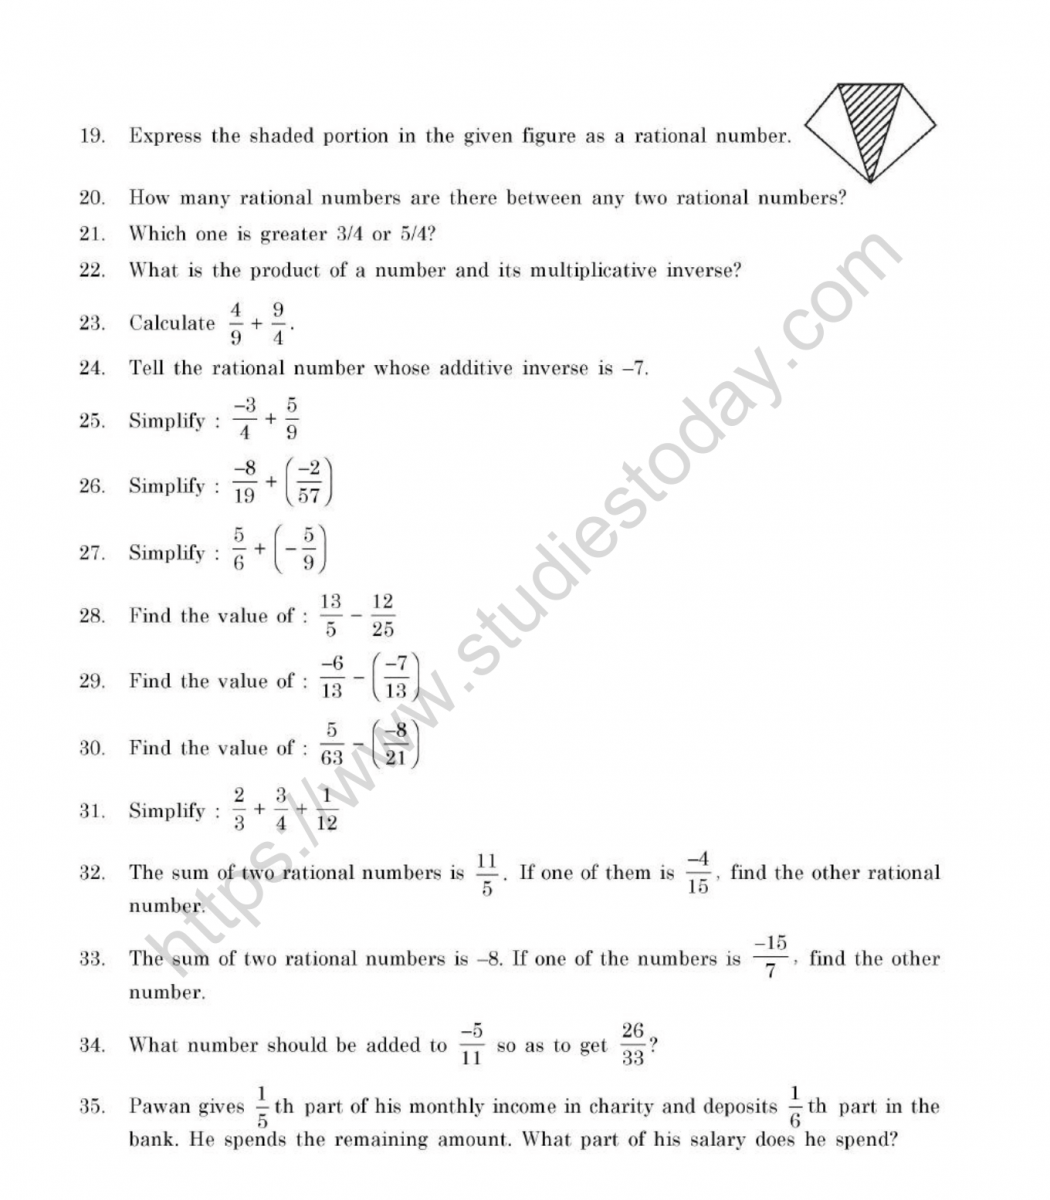 comparing-and-ordering-rational-numbers-worksheet-answer-key-pdf